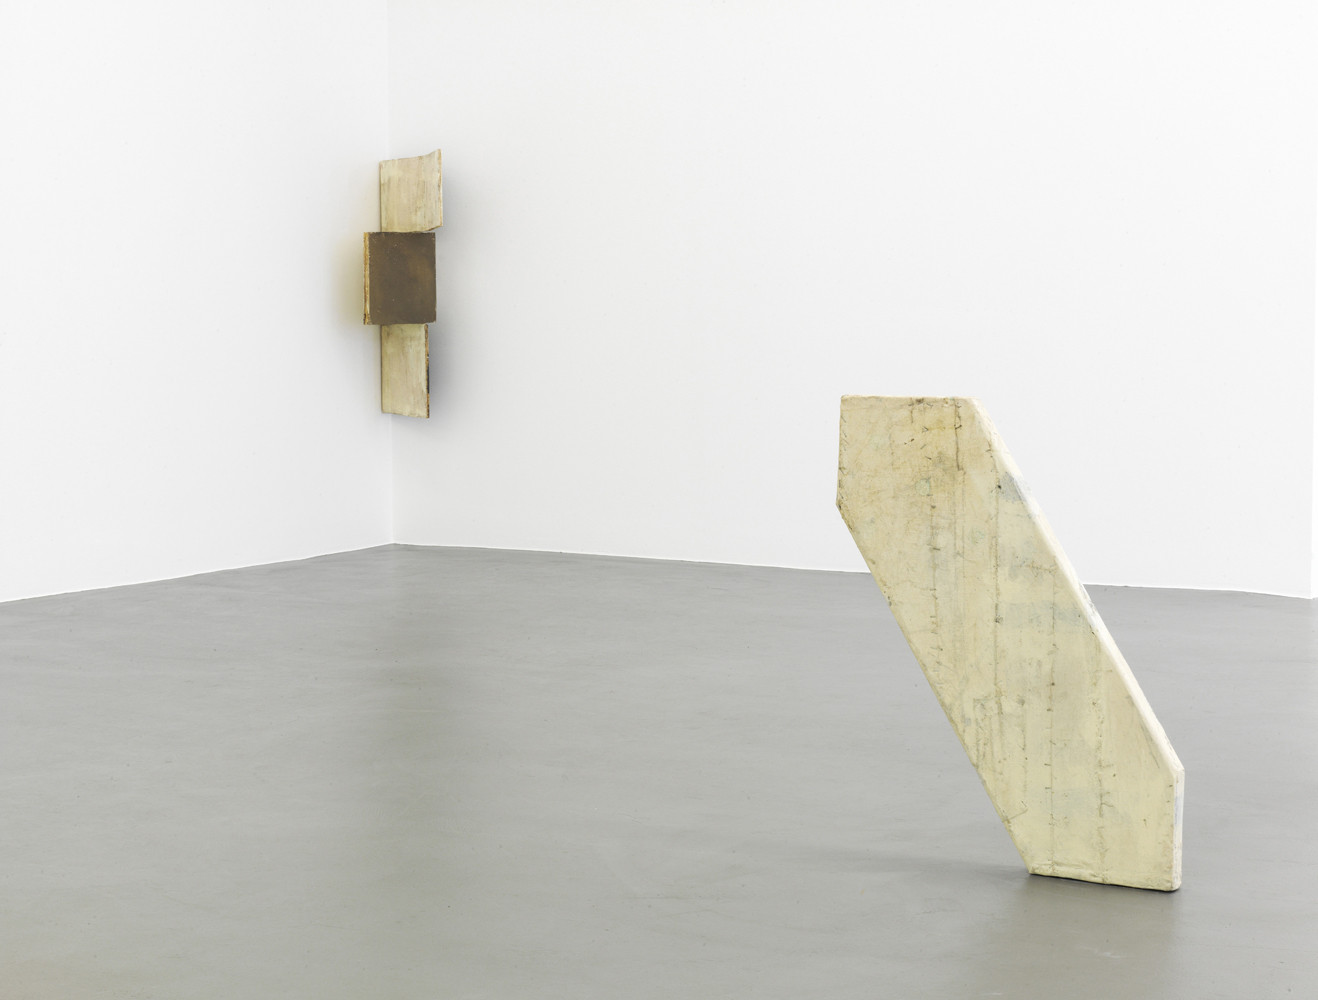 Lawrence Carroll, ‘Back to the Cave’, Installation view, Buchmann Galerie, 2013